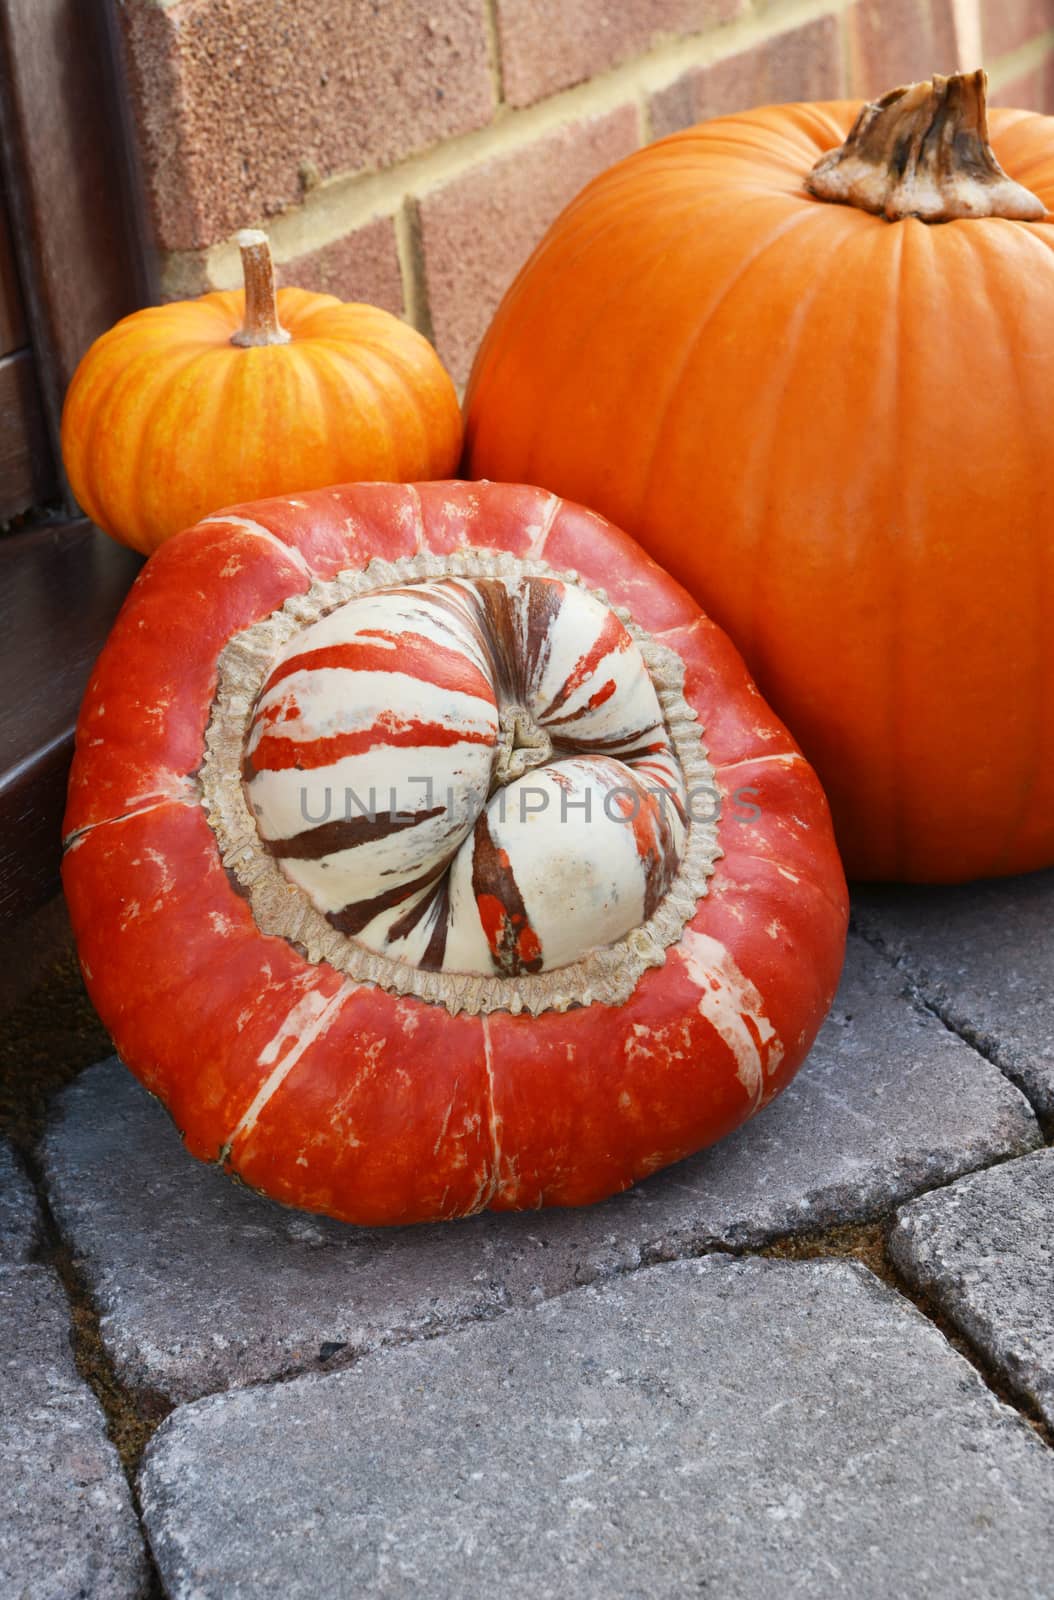 Striped Turks Turban gourd and pumpkins on a doorstep as a seasonal decoration - with copy space